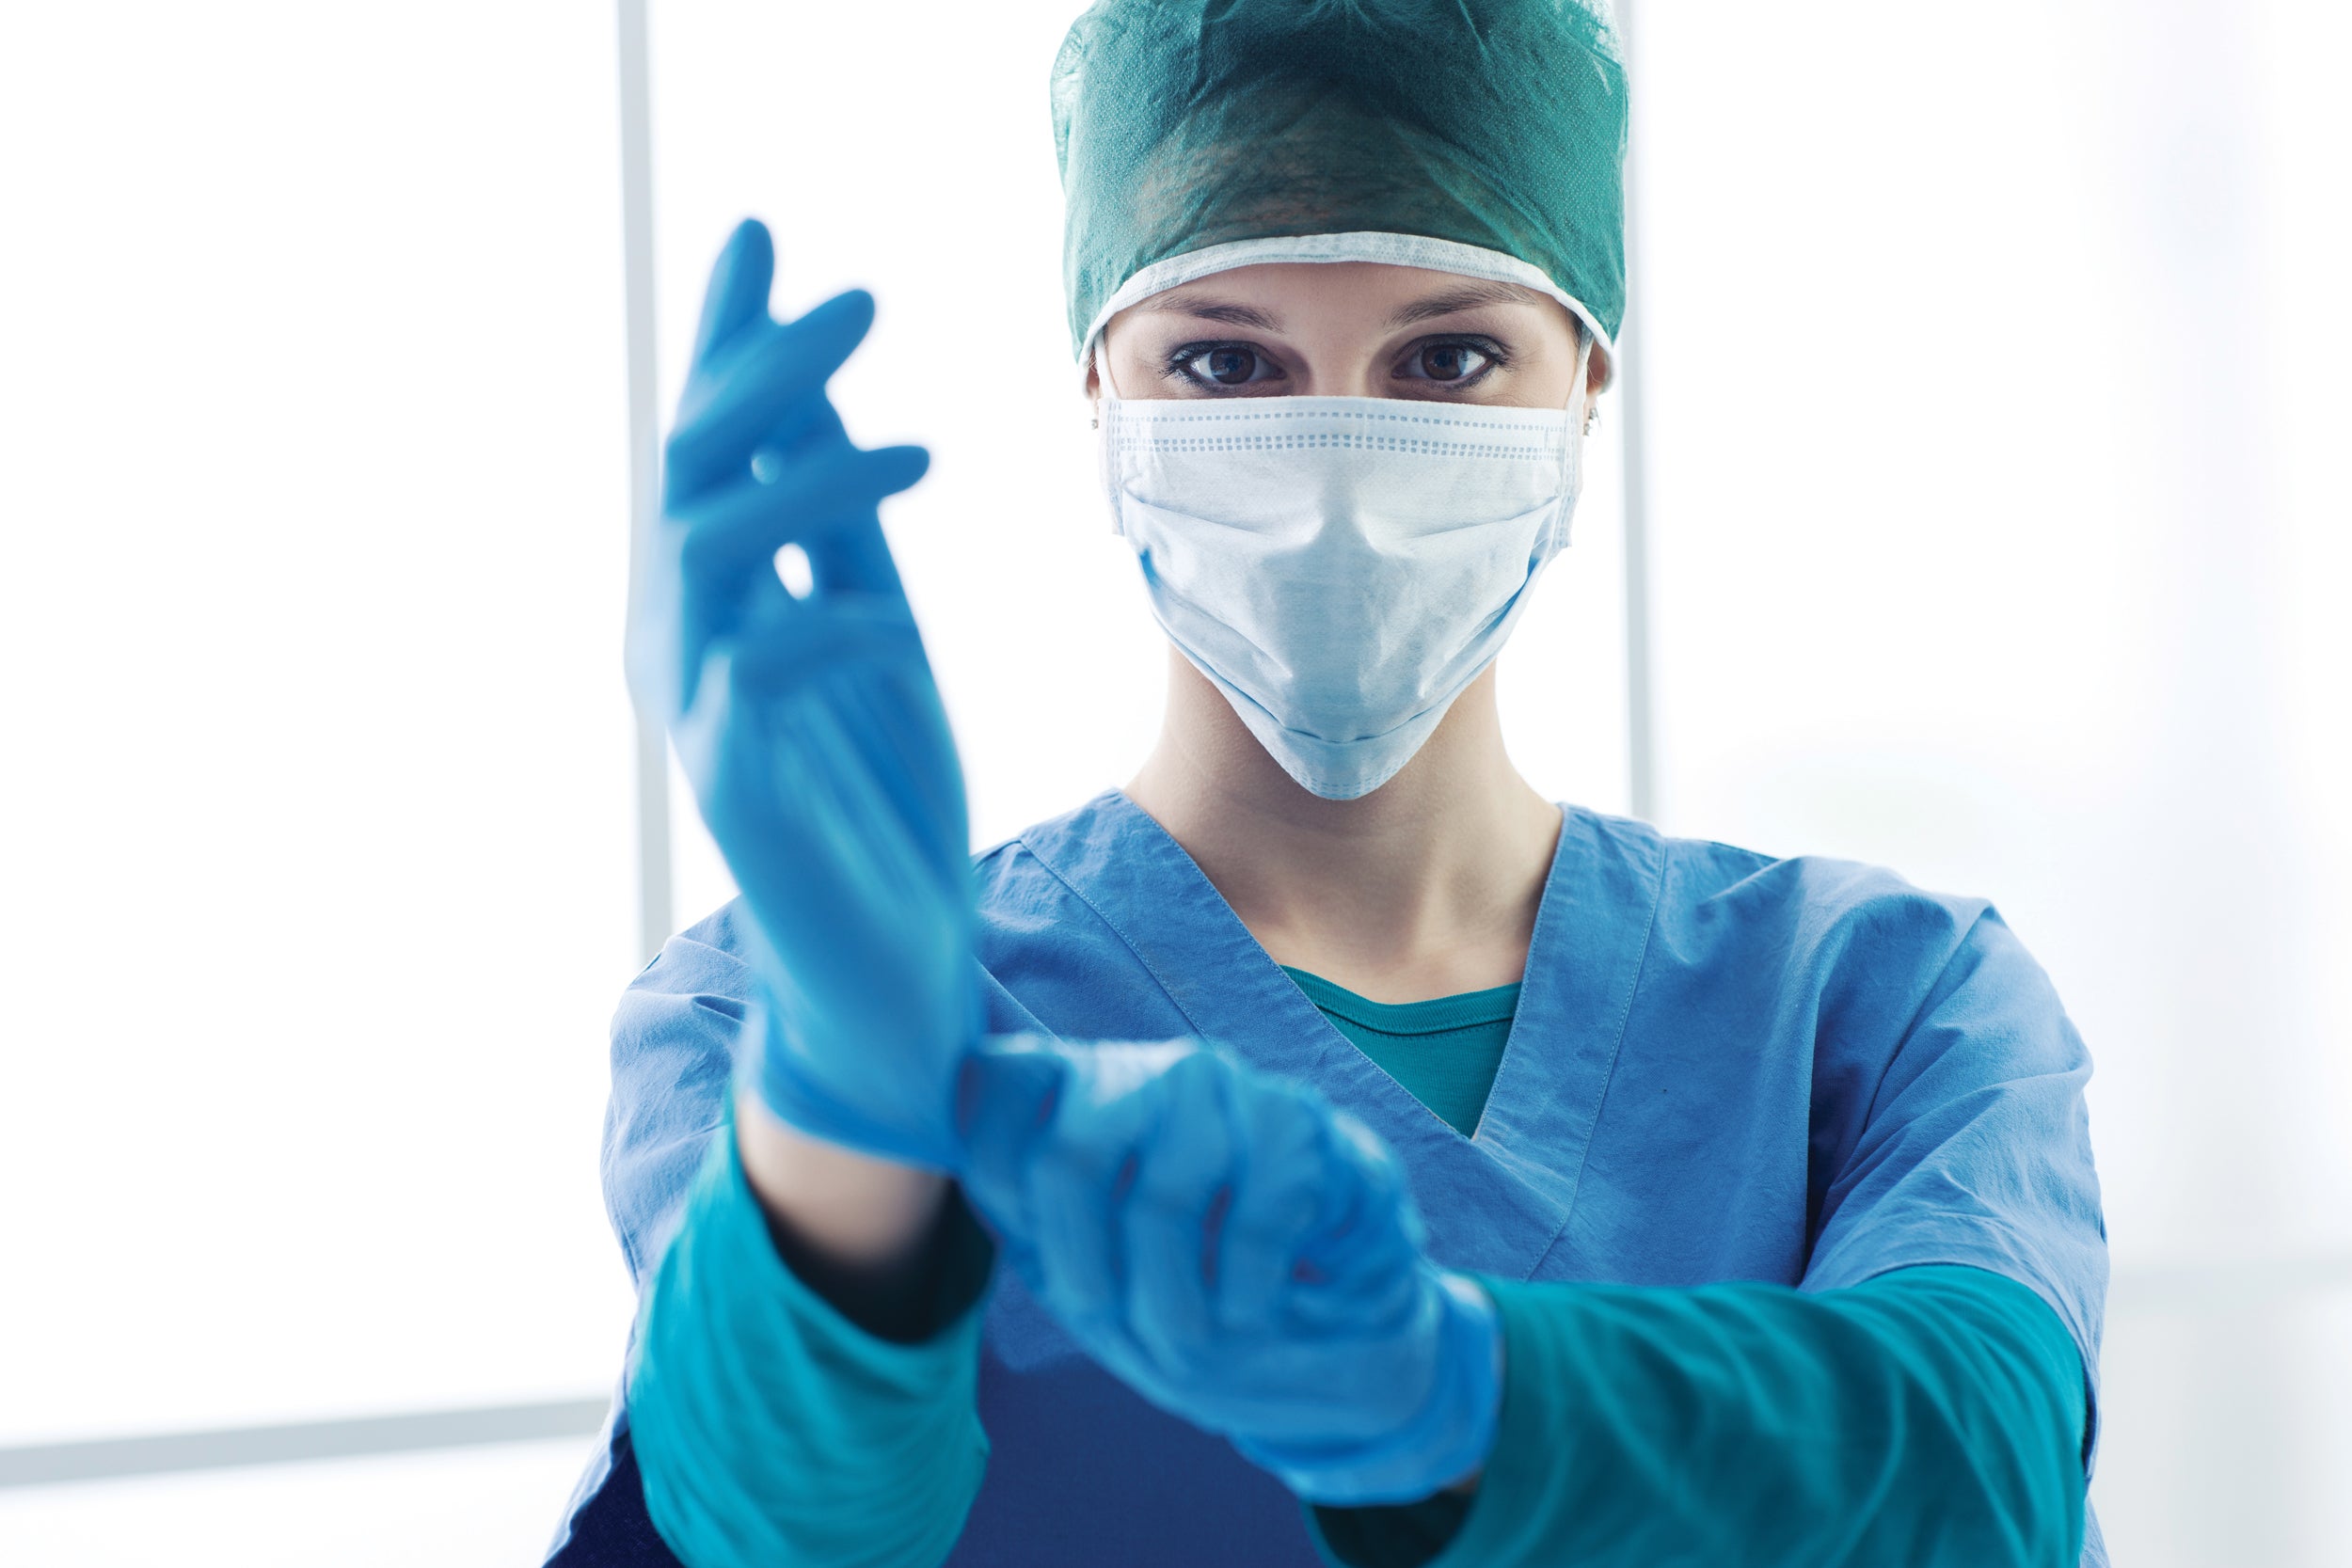 A woman donning personal protective equipment, a green cap, a light blue face mask, dark blue scrubs – pulling on a pair of dark blue exam gloves.